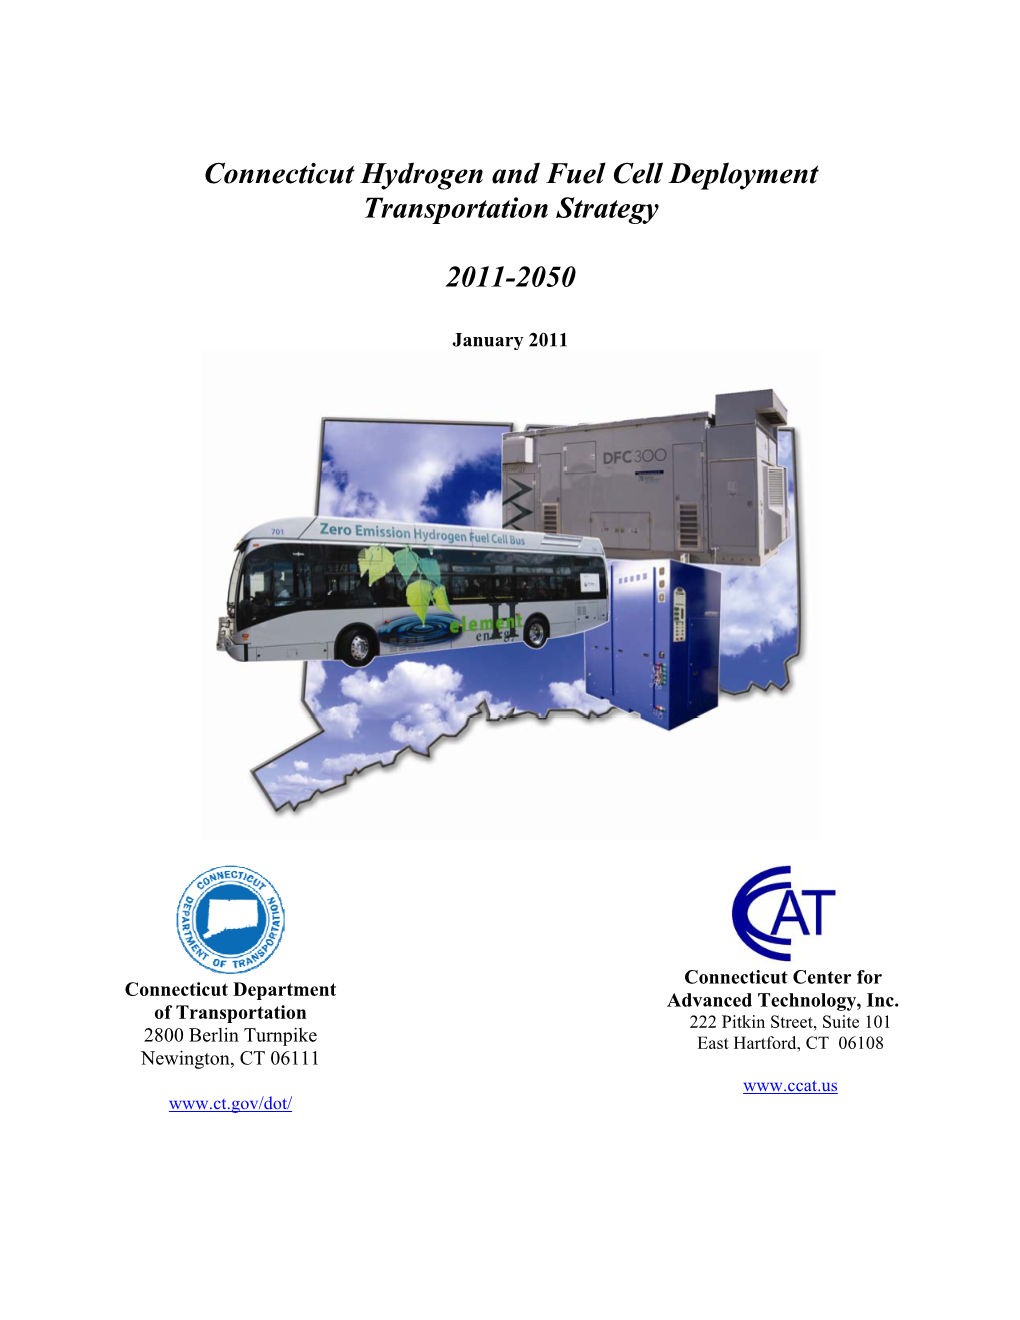 Connecticut Hydrogen and Fuel Cell Deployment Transportation Strategy